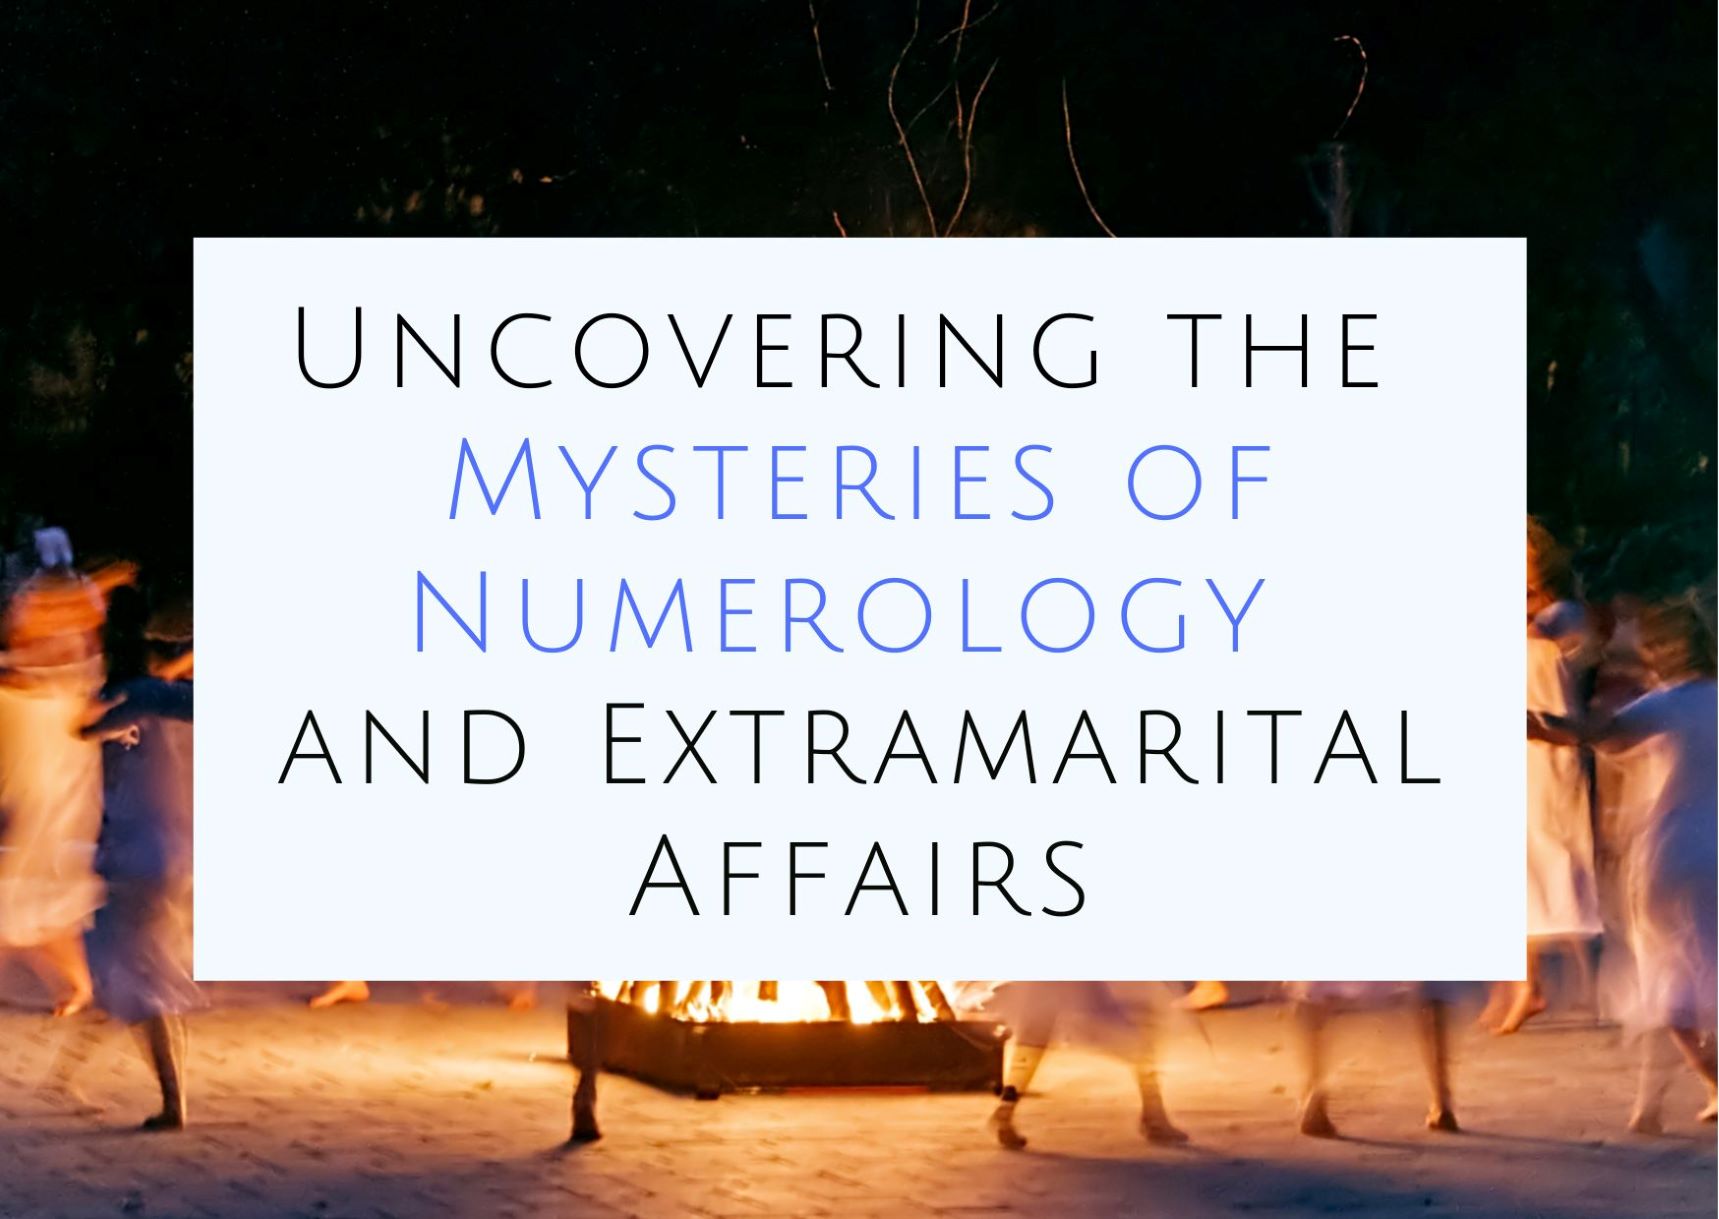 Uncovering the Mysteries of Numerology and Extramarital Affairs